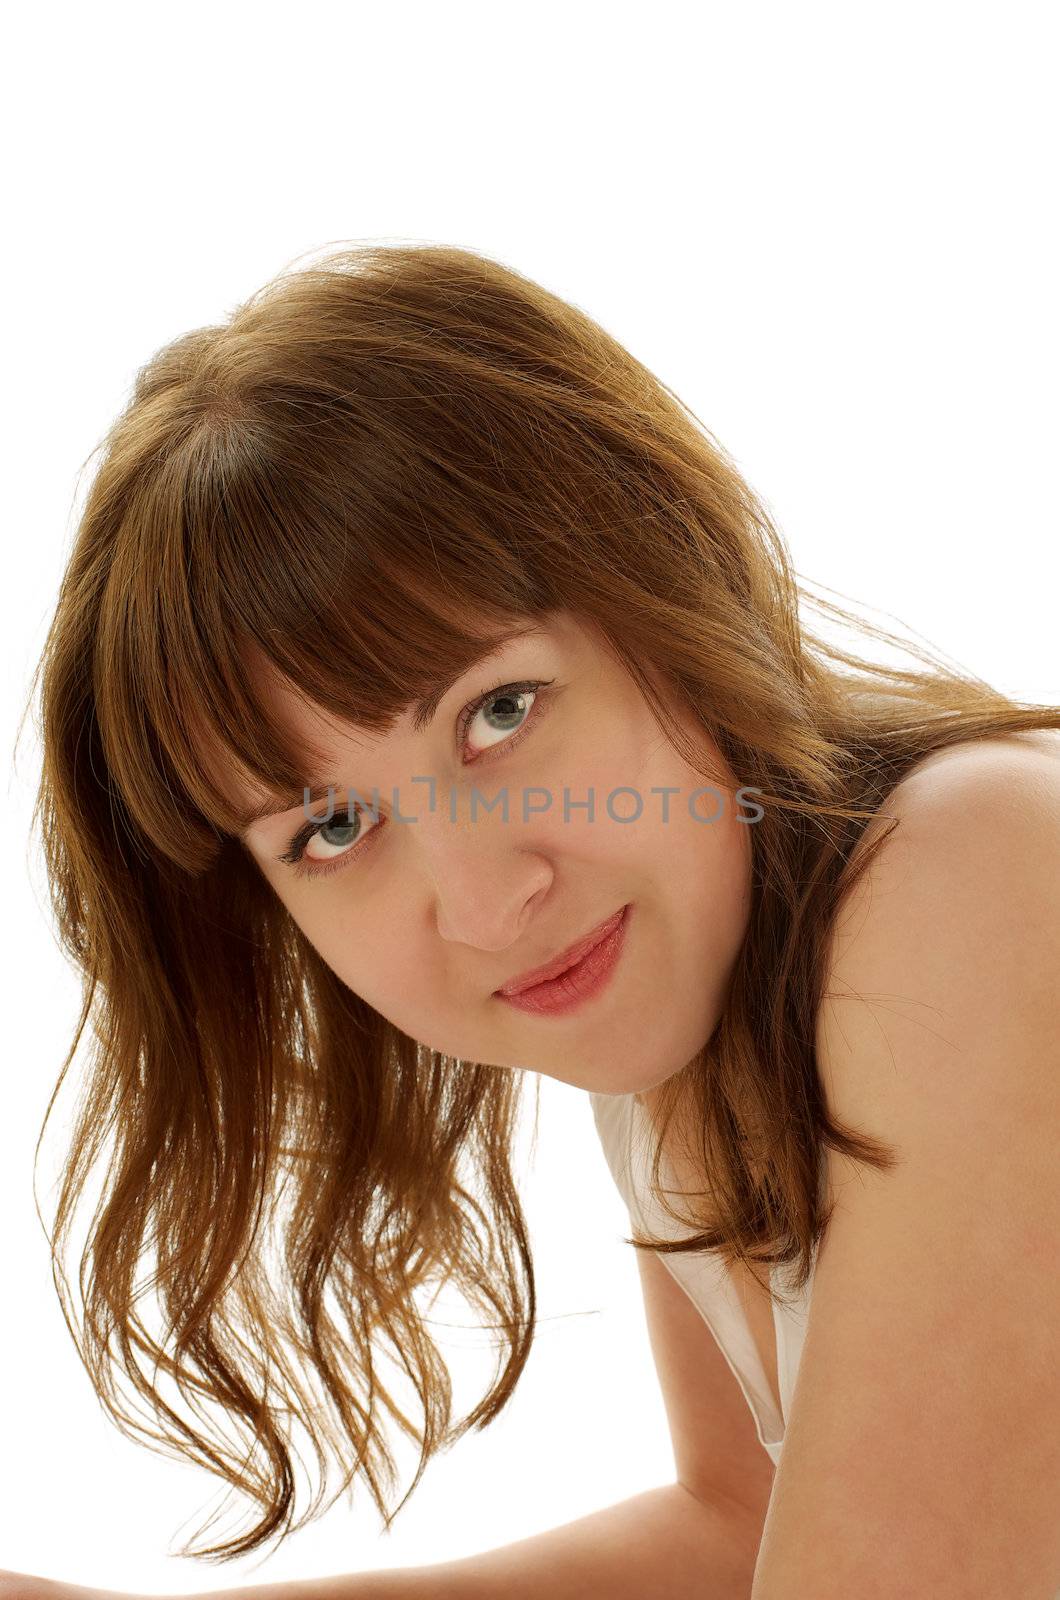 Attractive Ginger Hair Young Woman Looking at Camera and Smiling closeup on white background